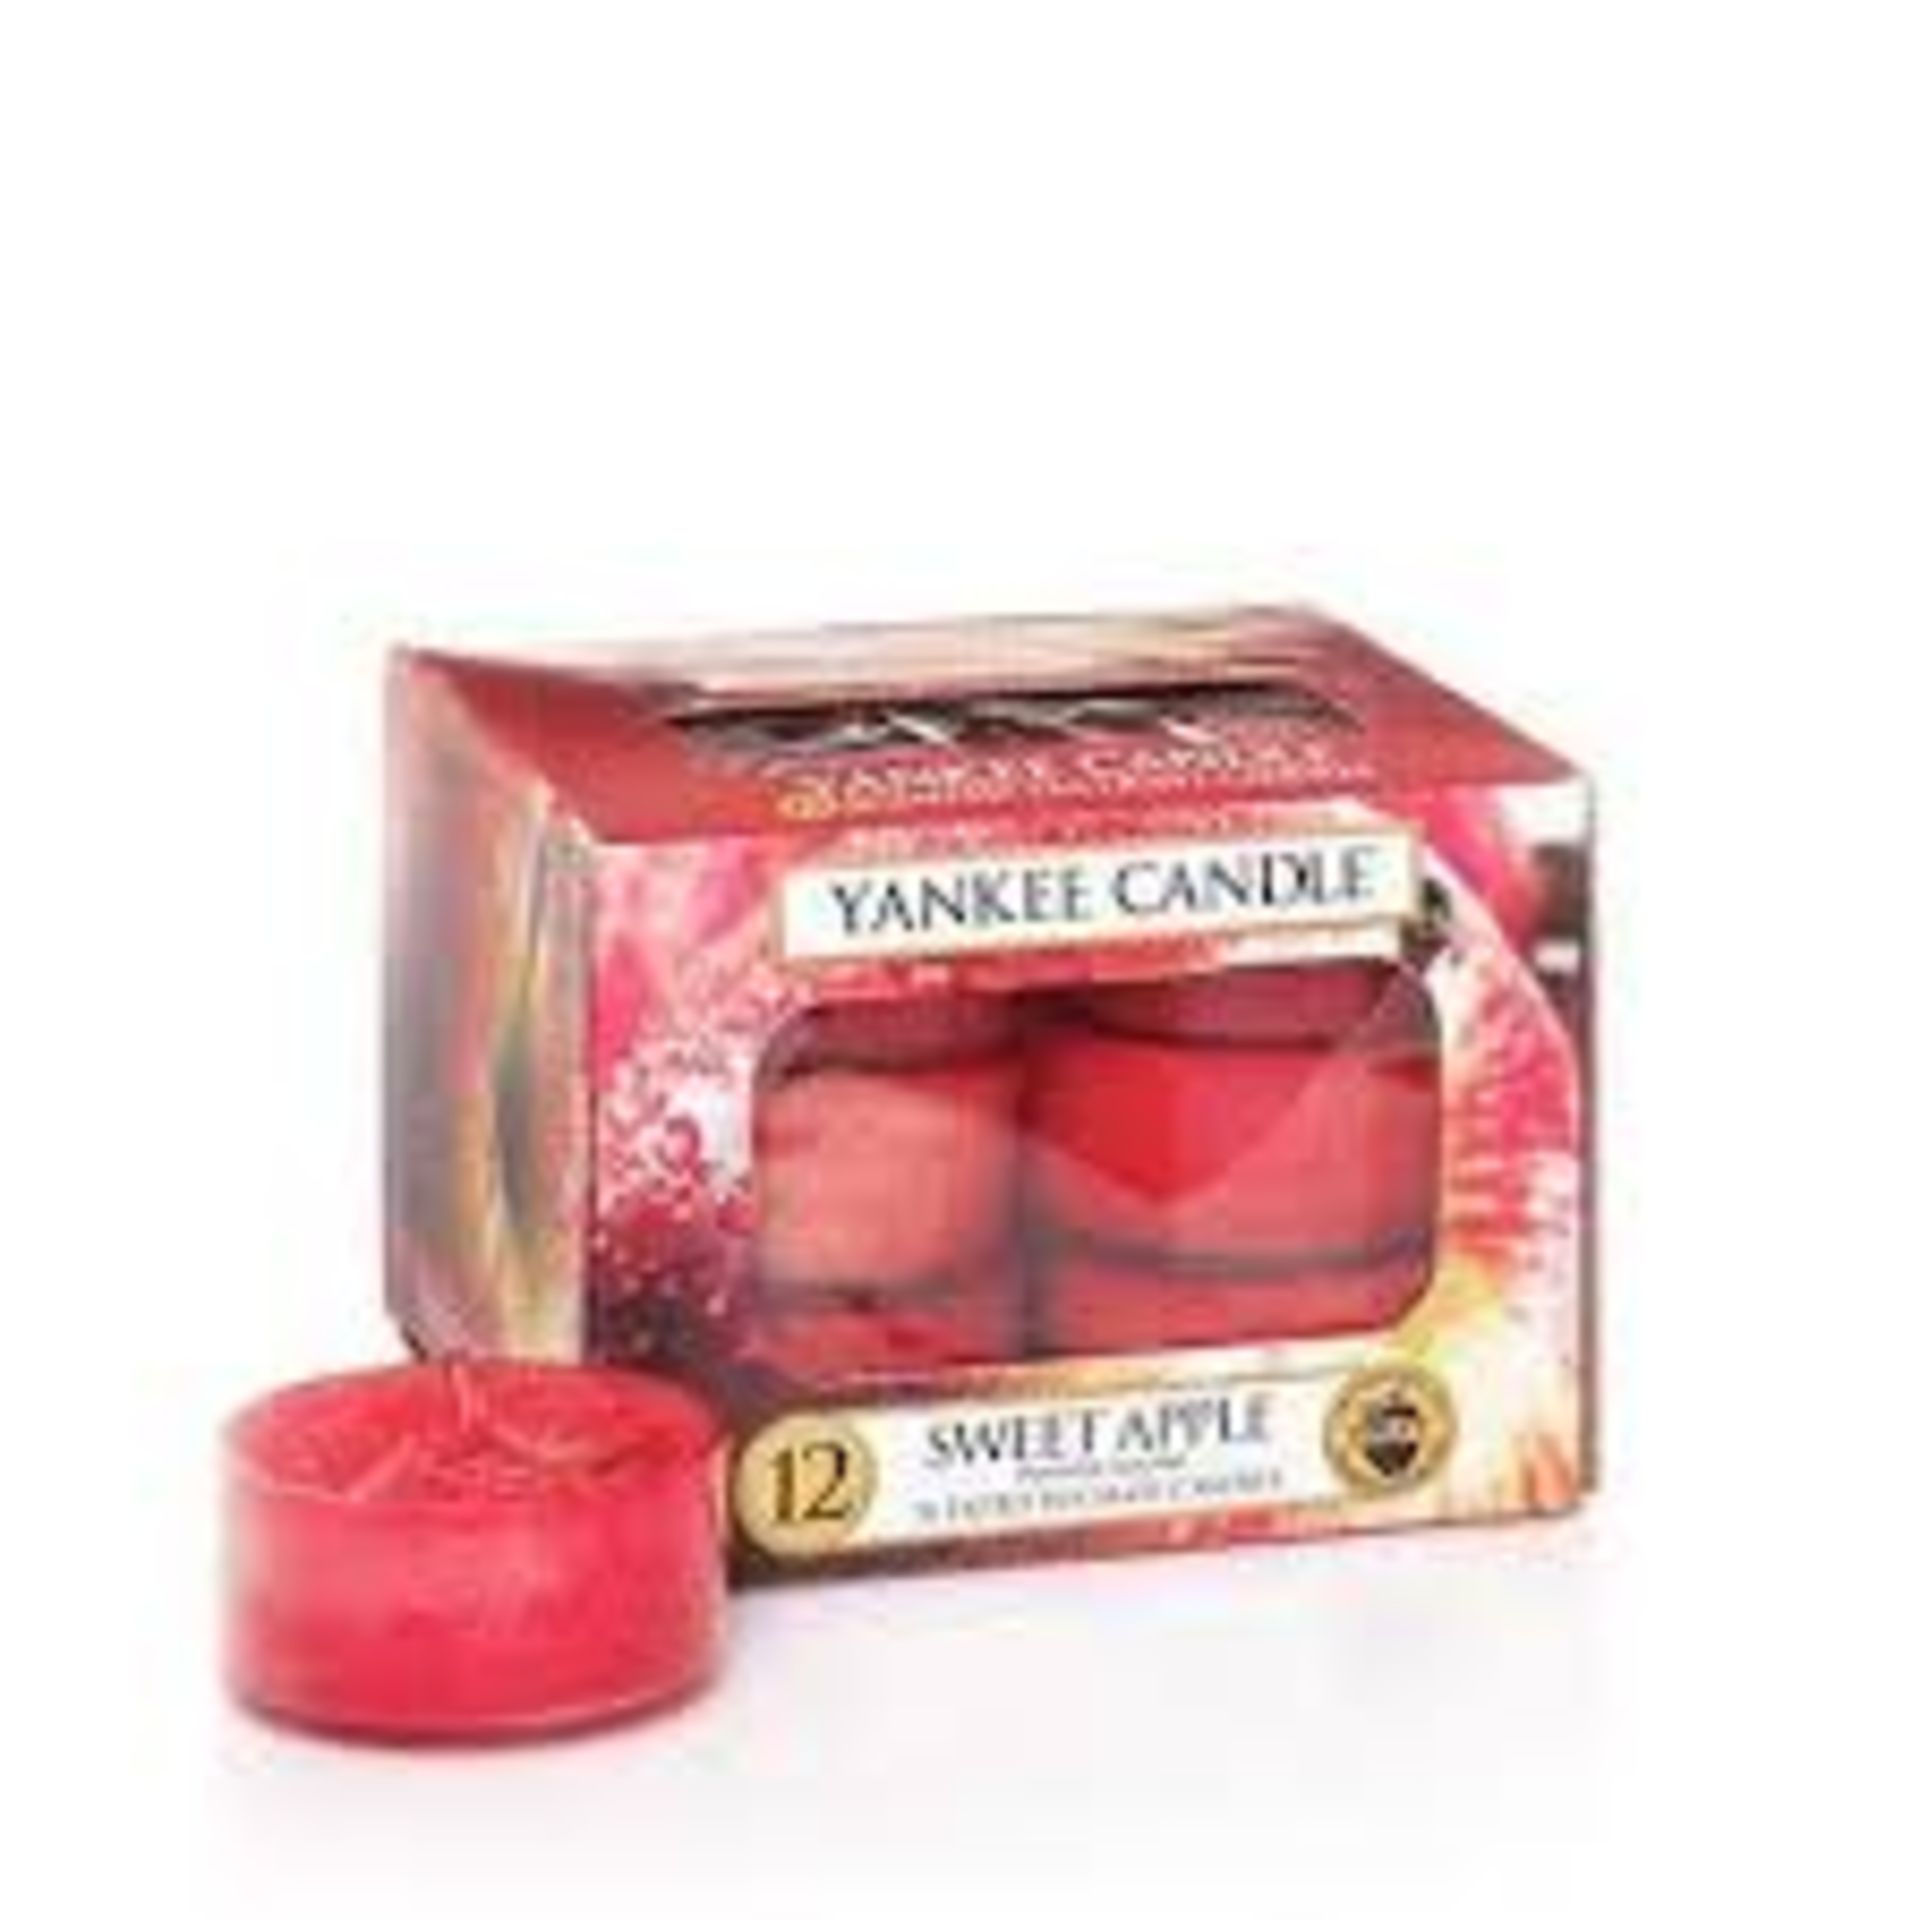 V Brand New 12 Yankee Candle Scented Tea Light Candles Sweet Apple